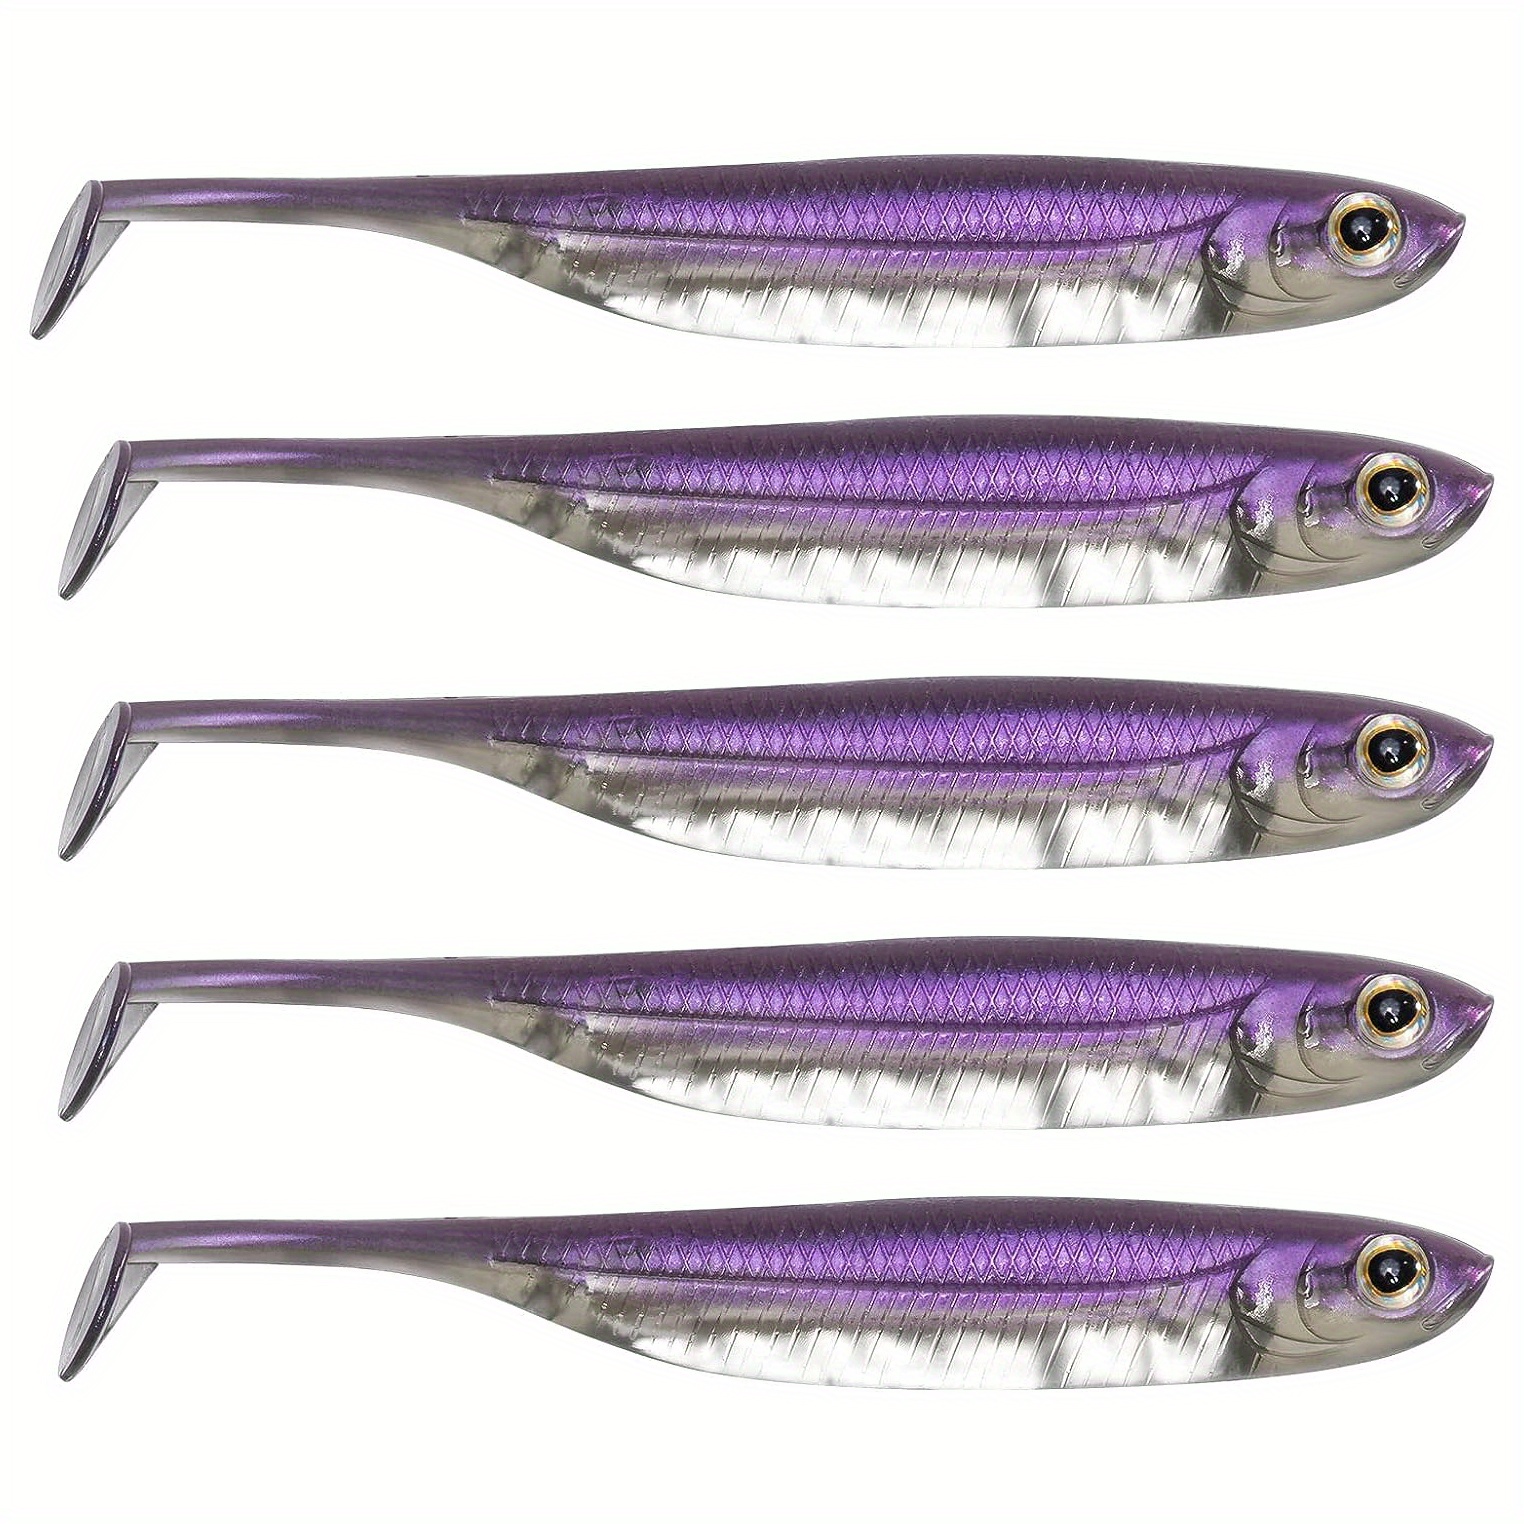 EMUKOEP 10Pcs Fishing Bait - 10cm 6g Soft Fishing Lures Loach Soft Bait  Soft Paddle Tail Fishing Swimbaits Lures for Bass Trout